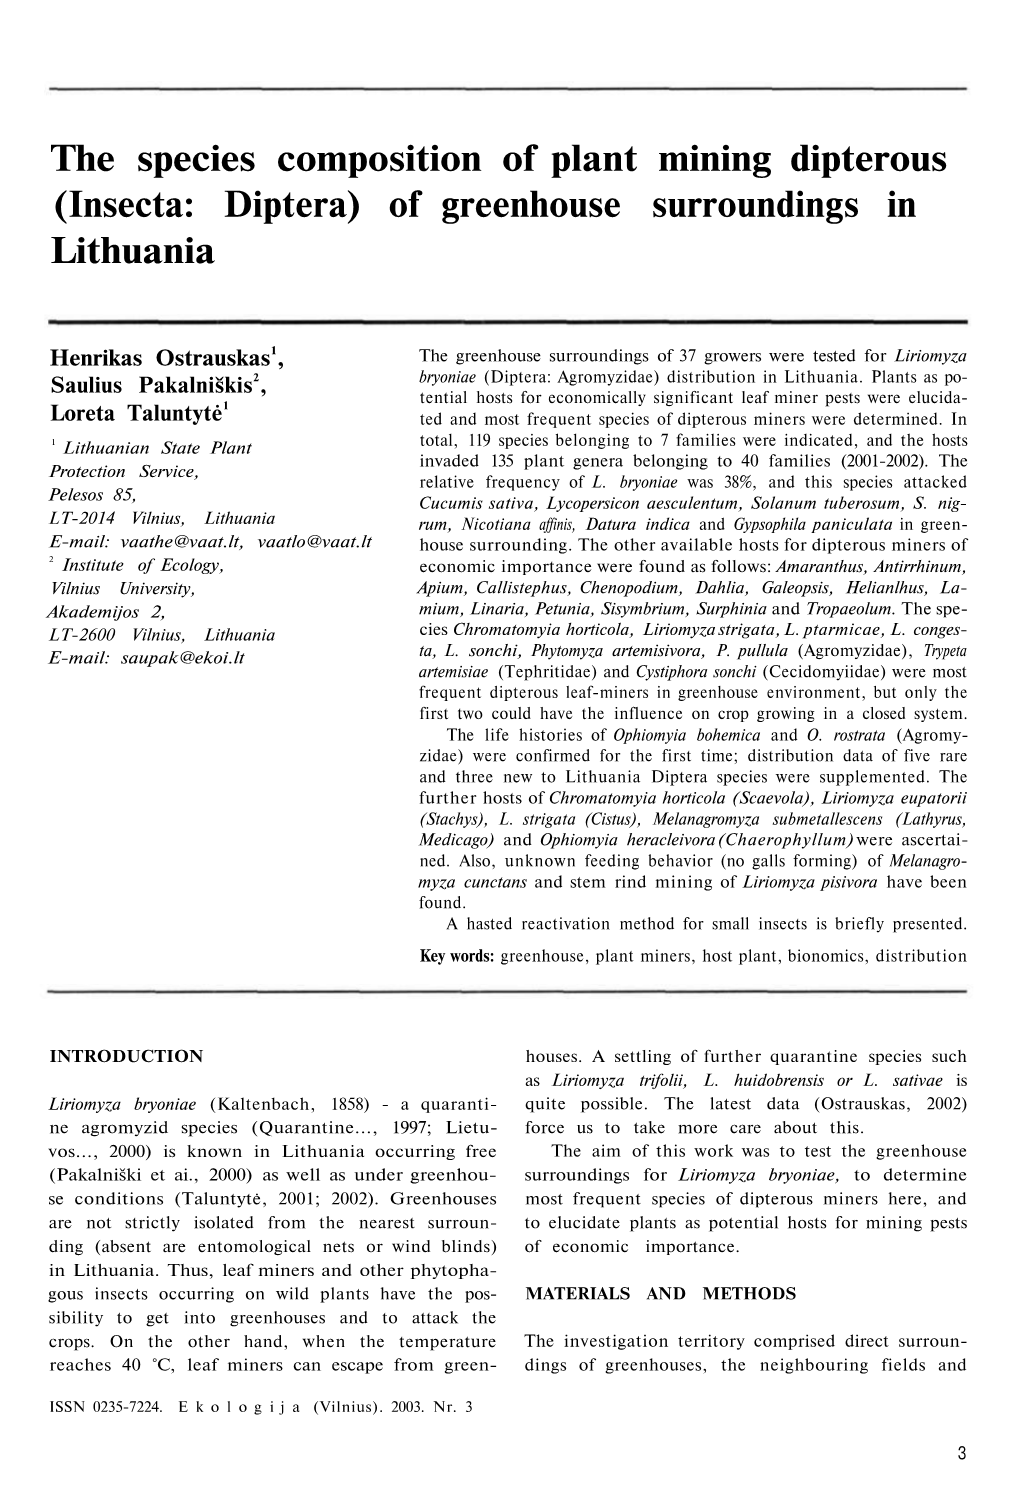 (Insecta: Diptera) of Greenhouse Surroundings in Lithuania